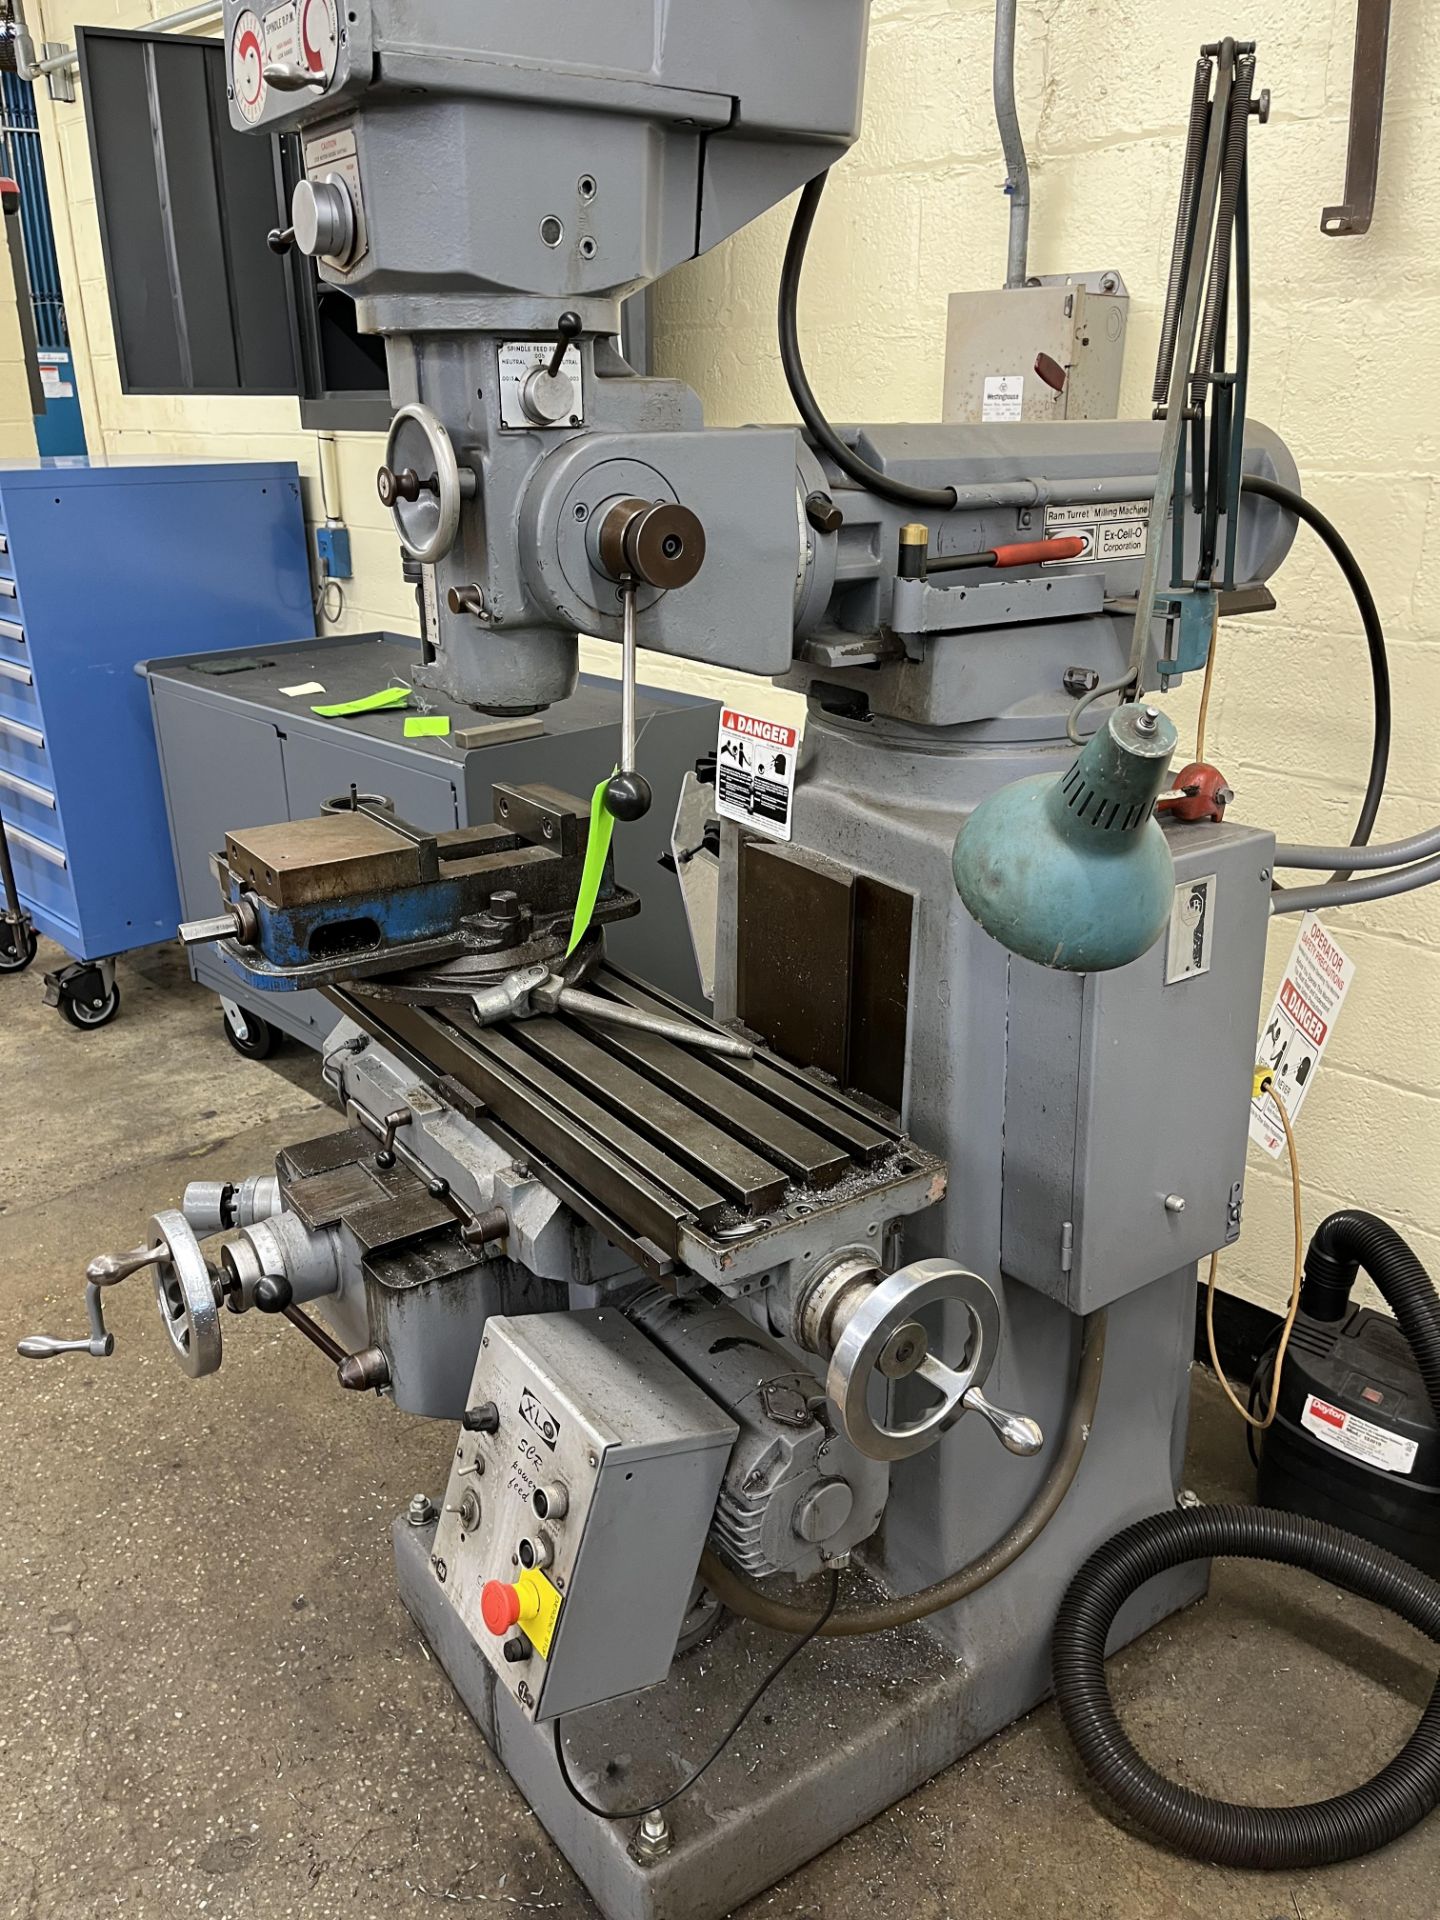 EX-CELL-O CORPORATION RAM TURRET MILLING MACHINE STYLE 602 SERIAL NO. 6026865 SPINDLE 460 VOLTS 2. - Image 2 of 8